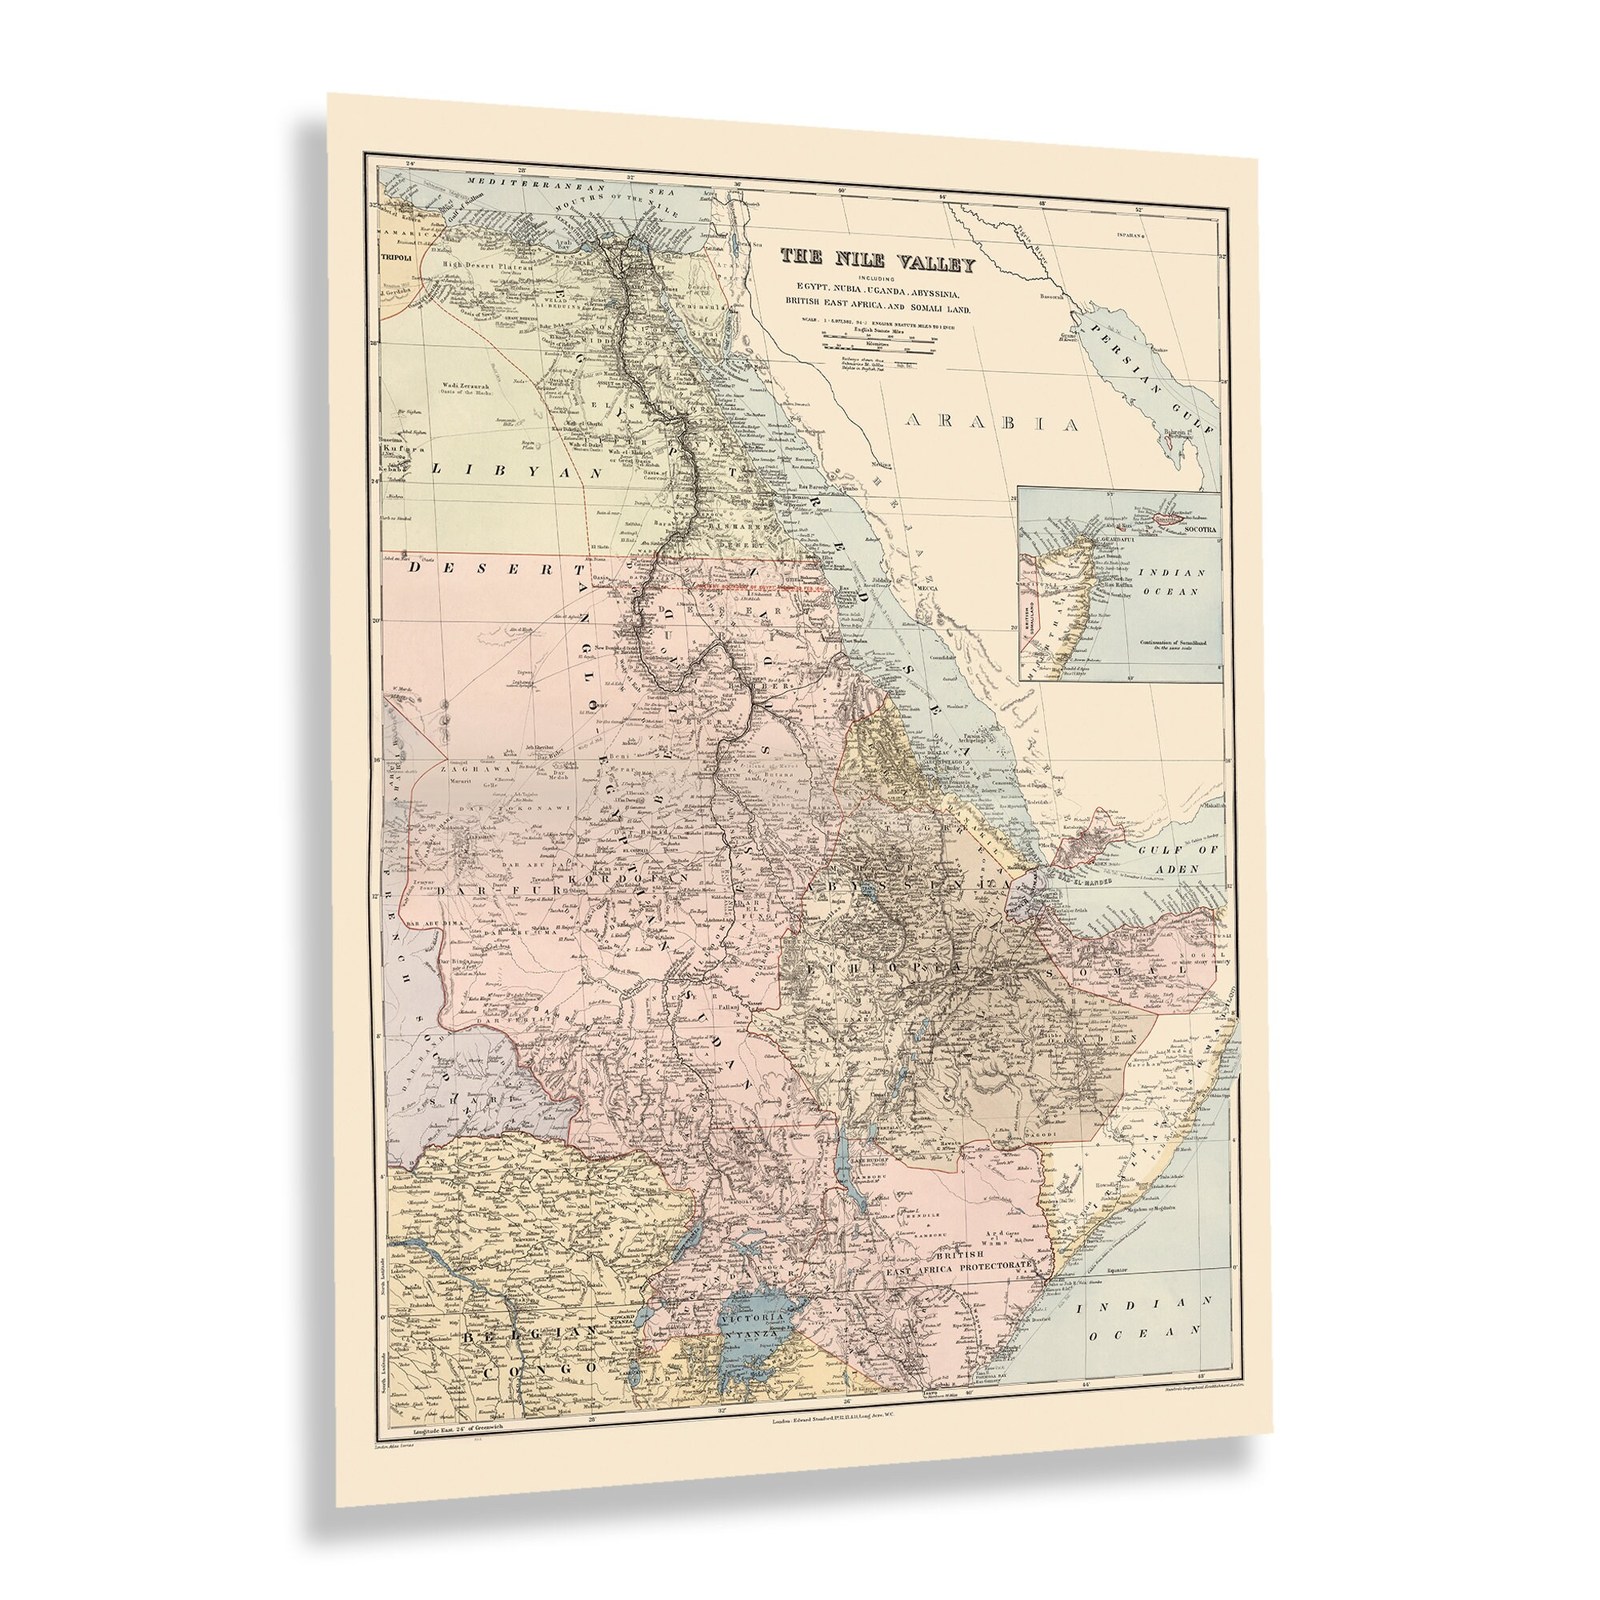 1910 The Nile Valley Egypt Nubia Uganda Abyssinia Map Print Wall Art Poster - $39.99 - $59.99